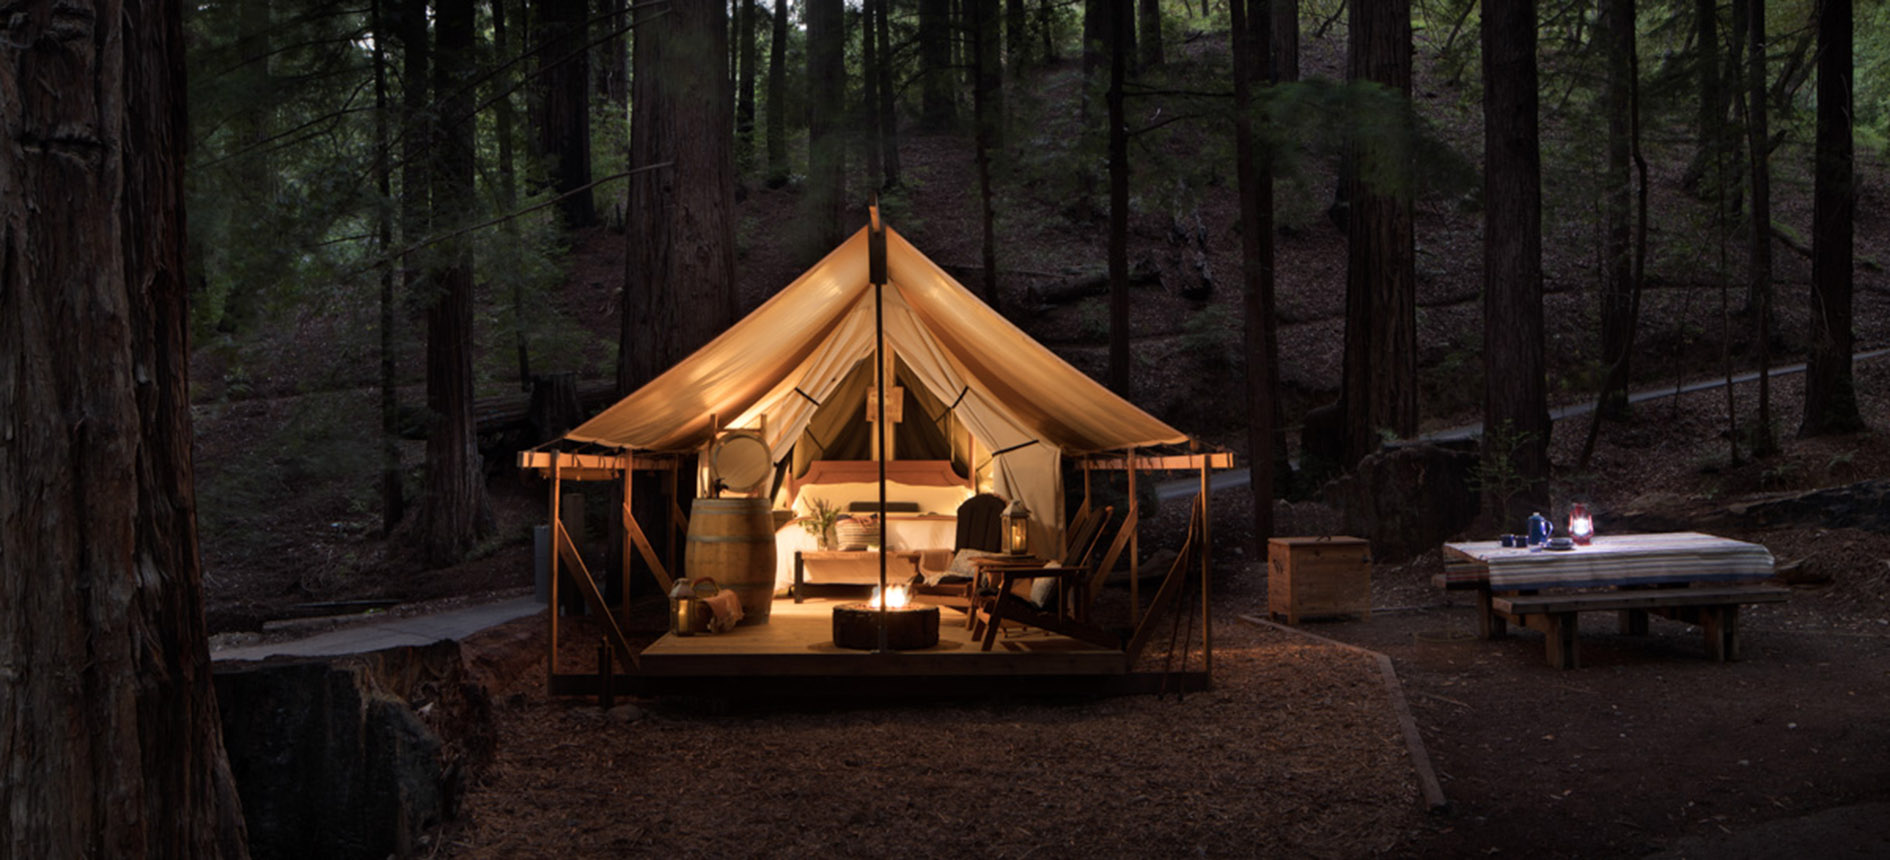 Glamping Destinations, Information and Experiences ...
